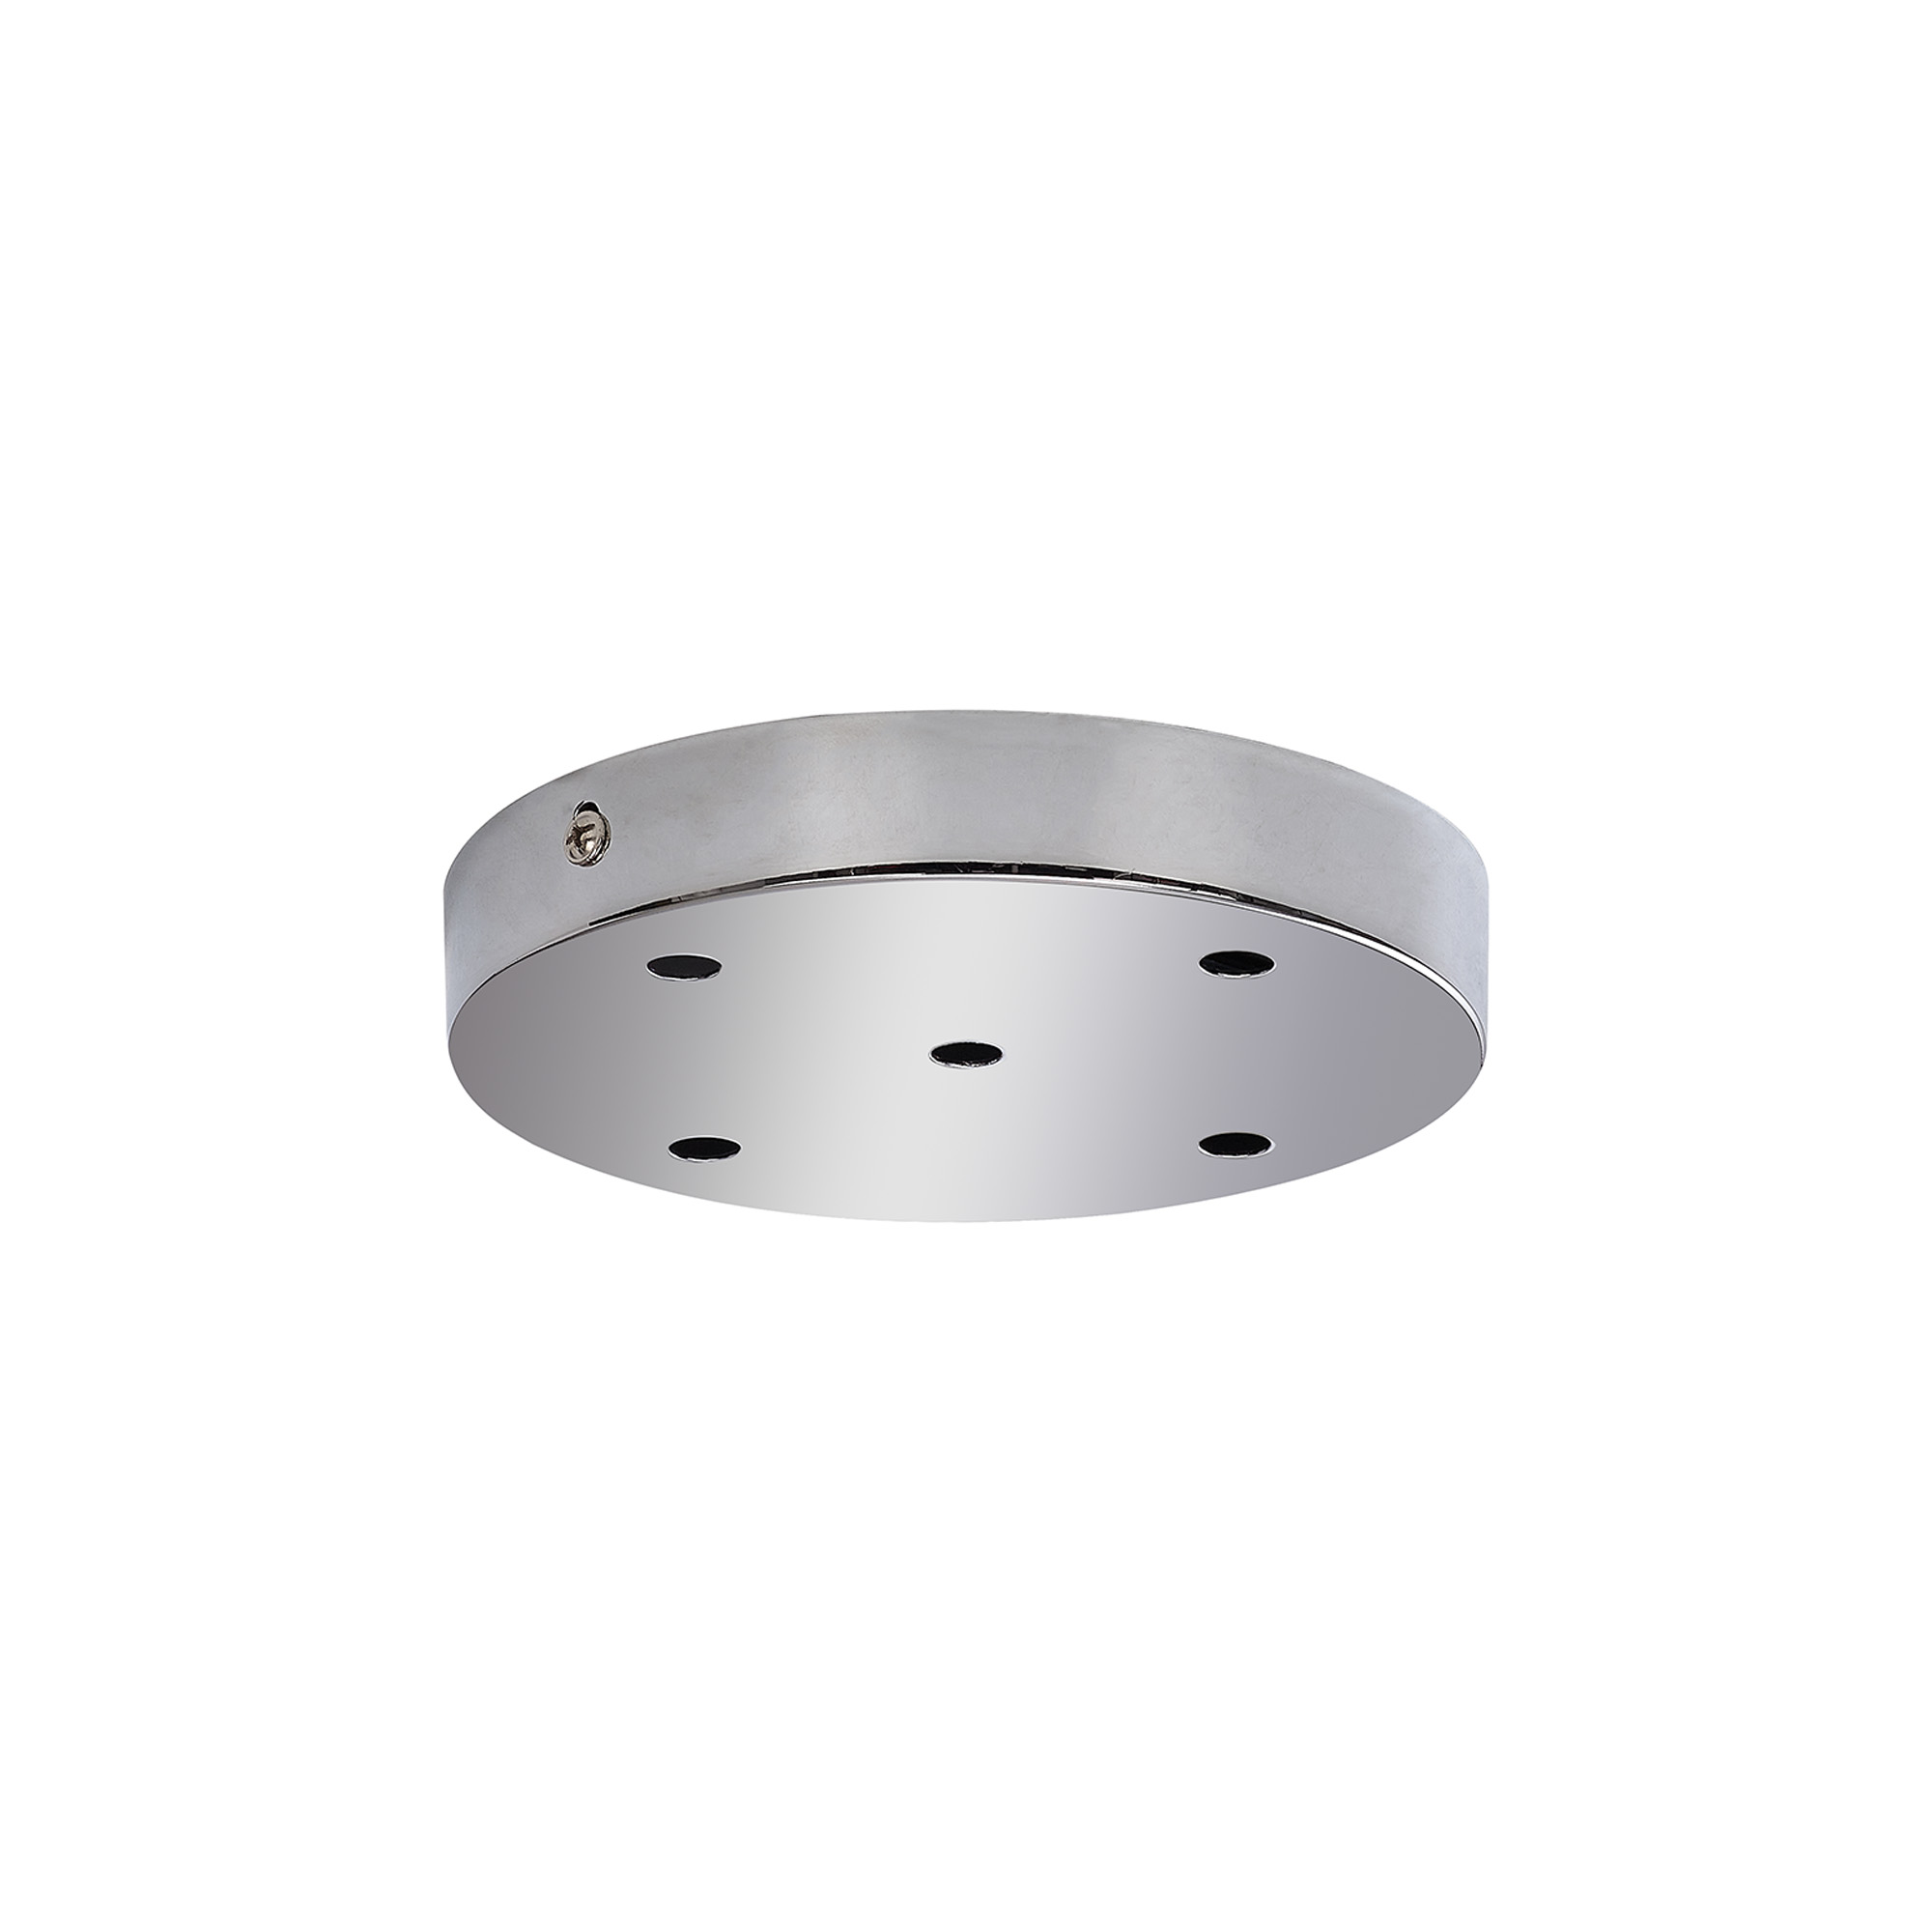 D0828CH  Hayes 5 Hole 15cm Round Ceiling Plate Polished Chrome